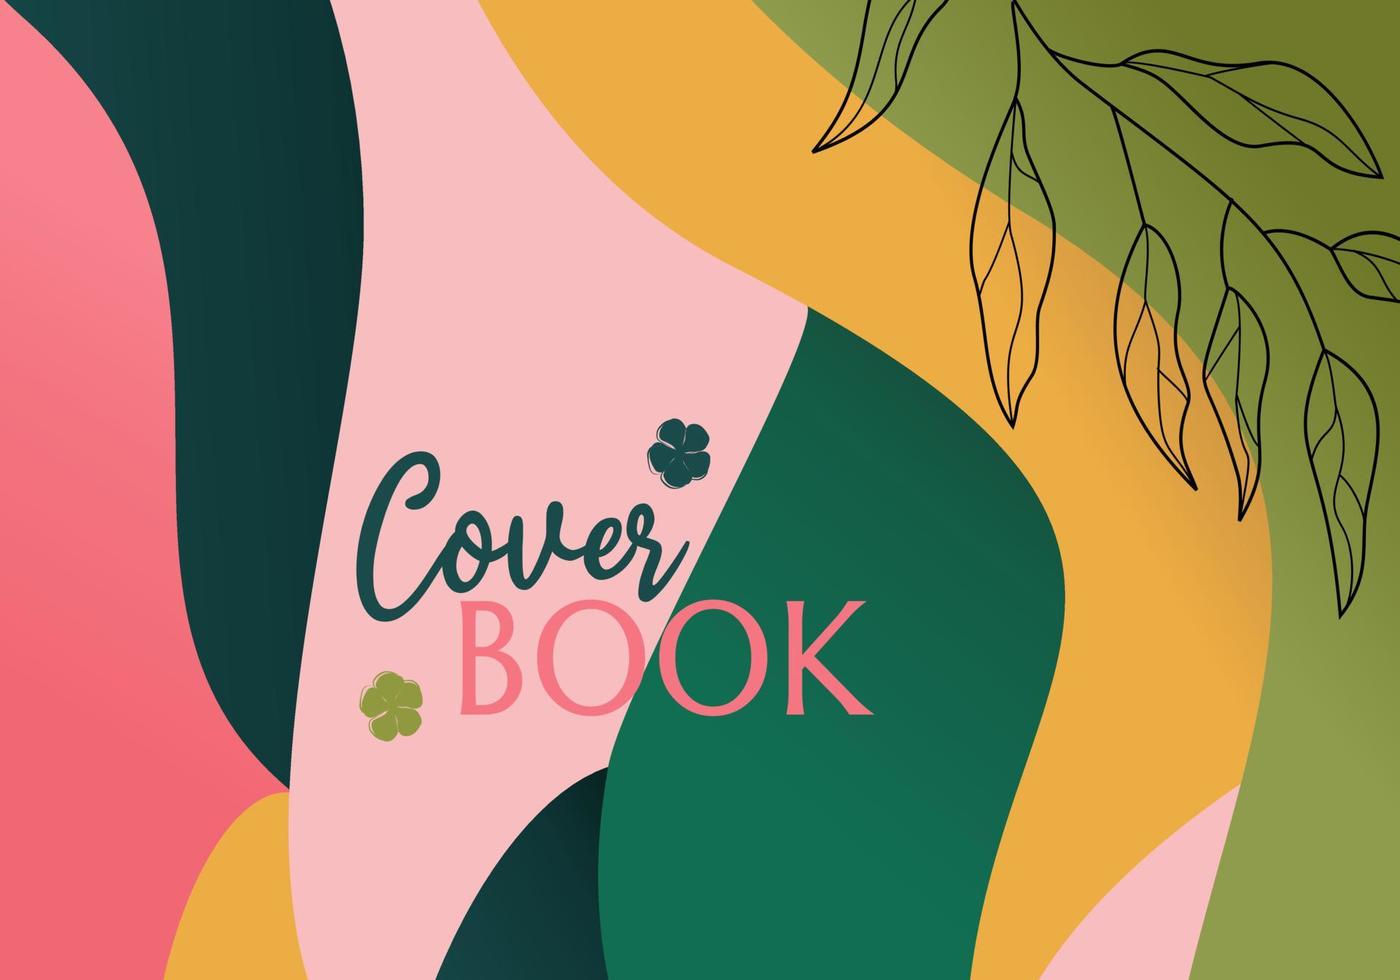 landscape cover design with colorful waves pattern vector